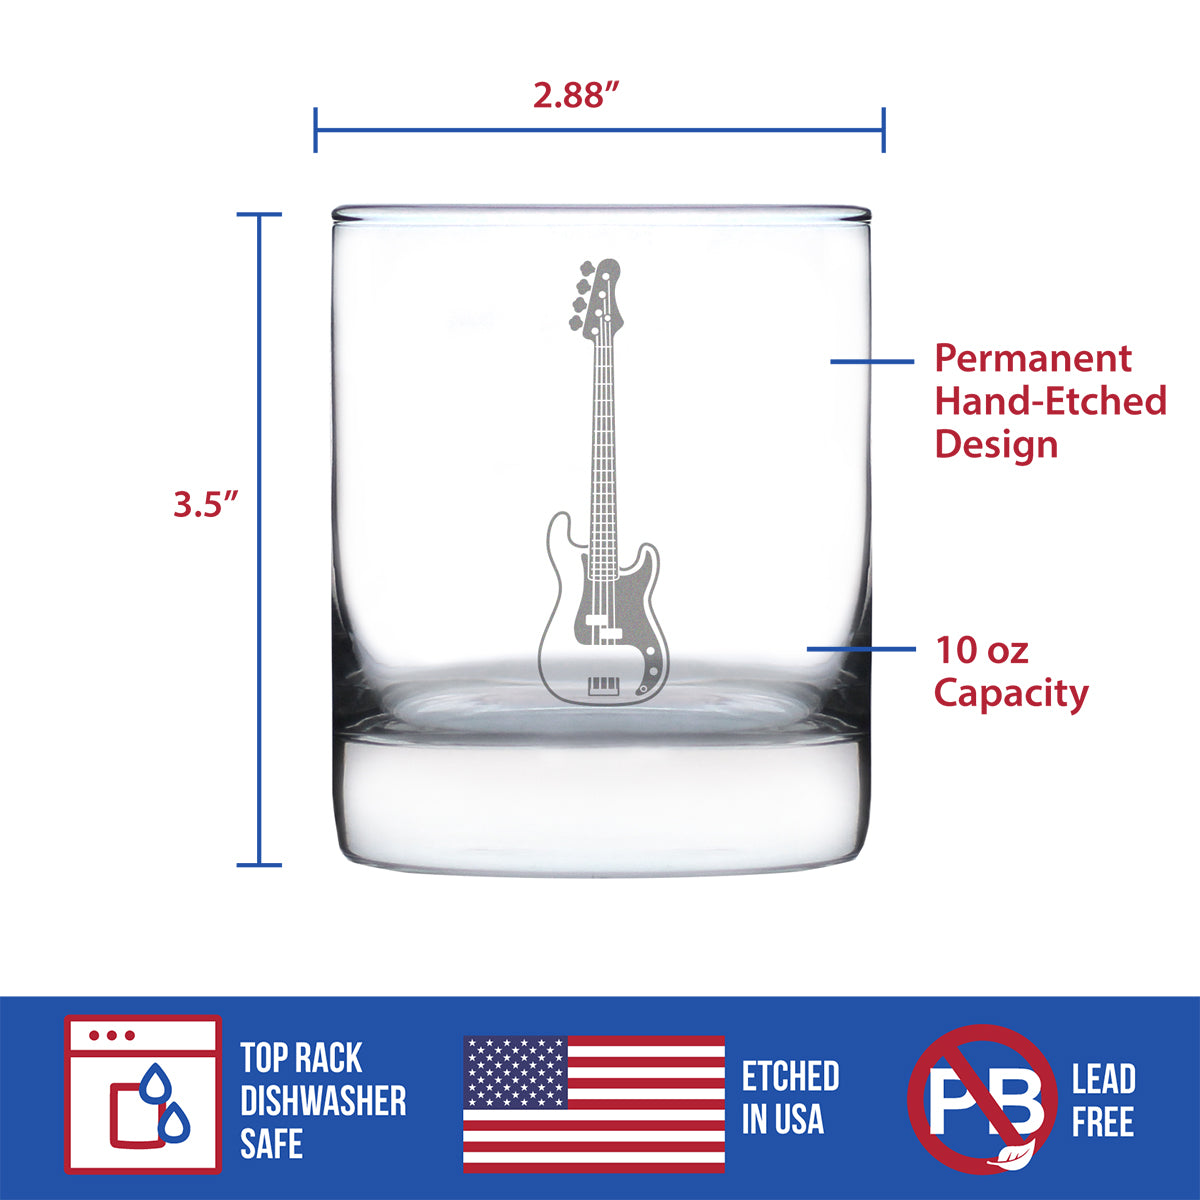 Electric Bass Rocks Glass - Music Gifts for Bass Players, Teachers and Musical Accessories for Musicians that Play Bass Guitar - 10.25 Oz Glasses